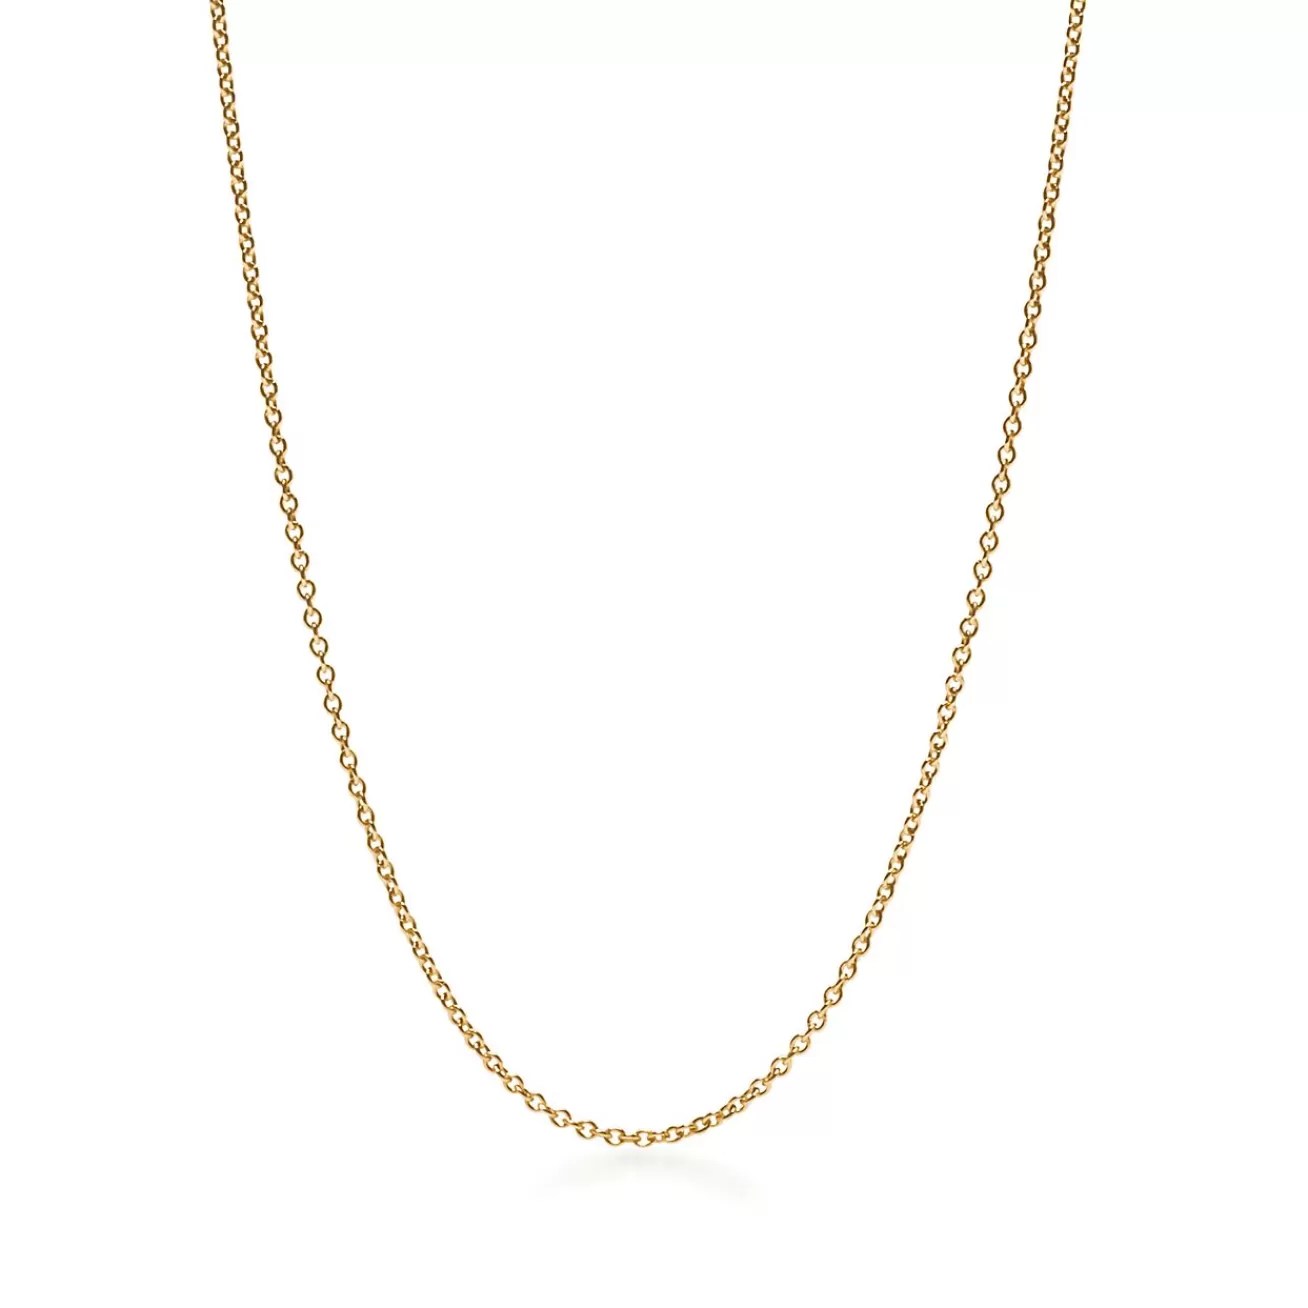 Tiffany & Co. Shop 18K Gold Chain Necklace in 30" Length | ^ Necklaces & Pendants | Men's Jewelry